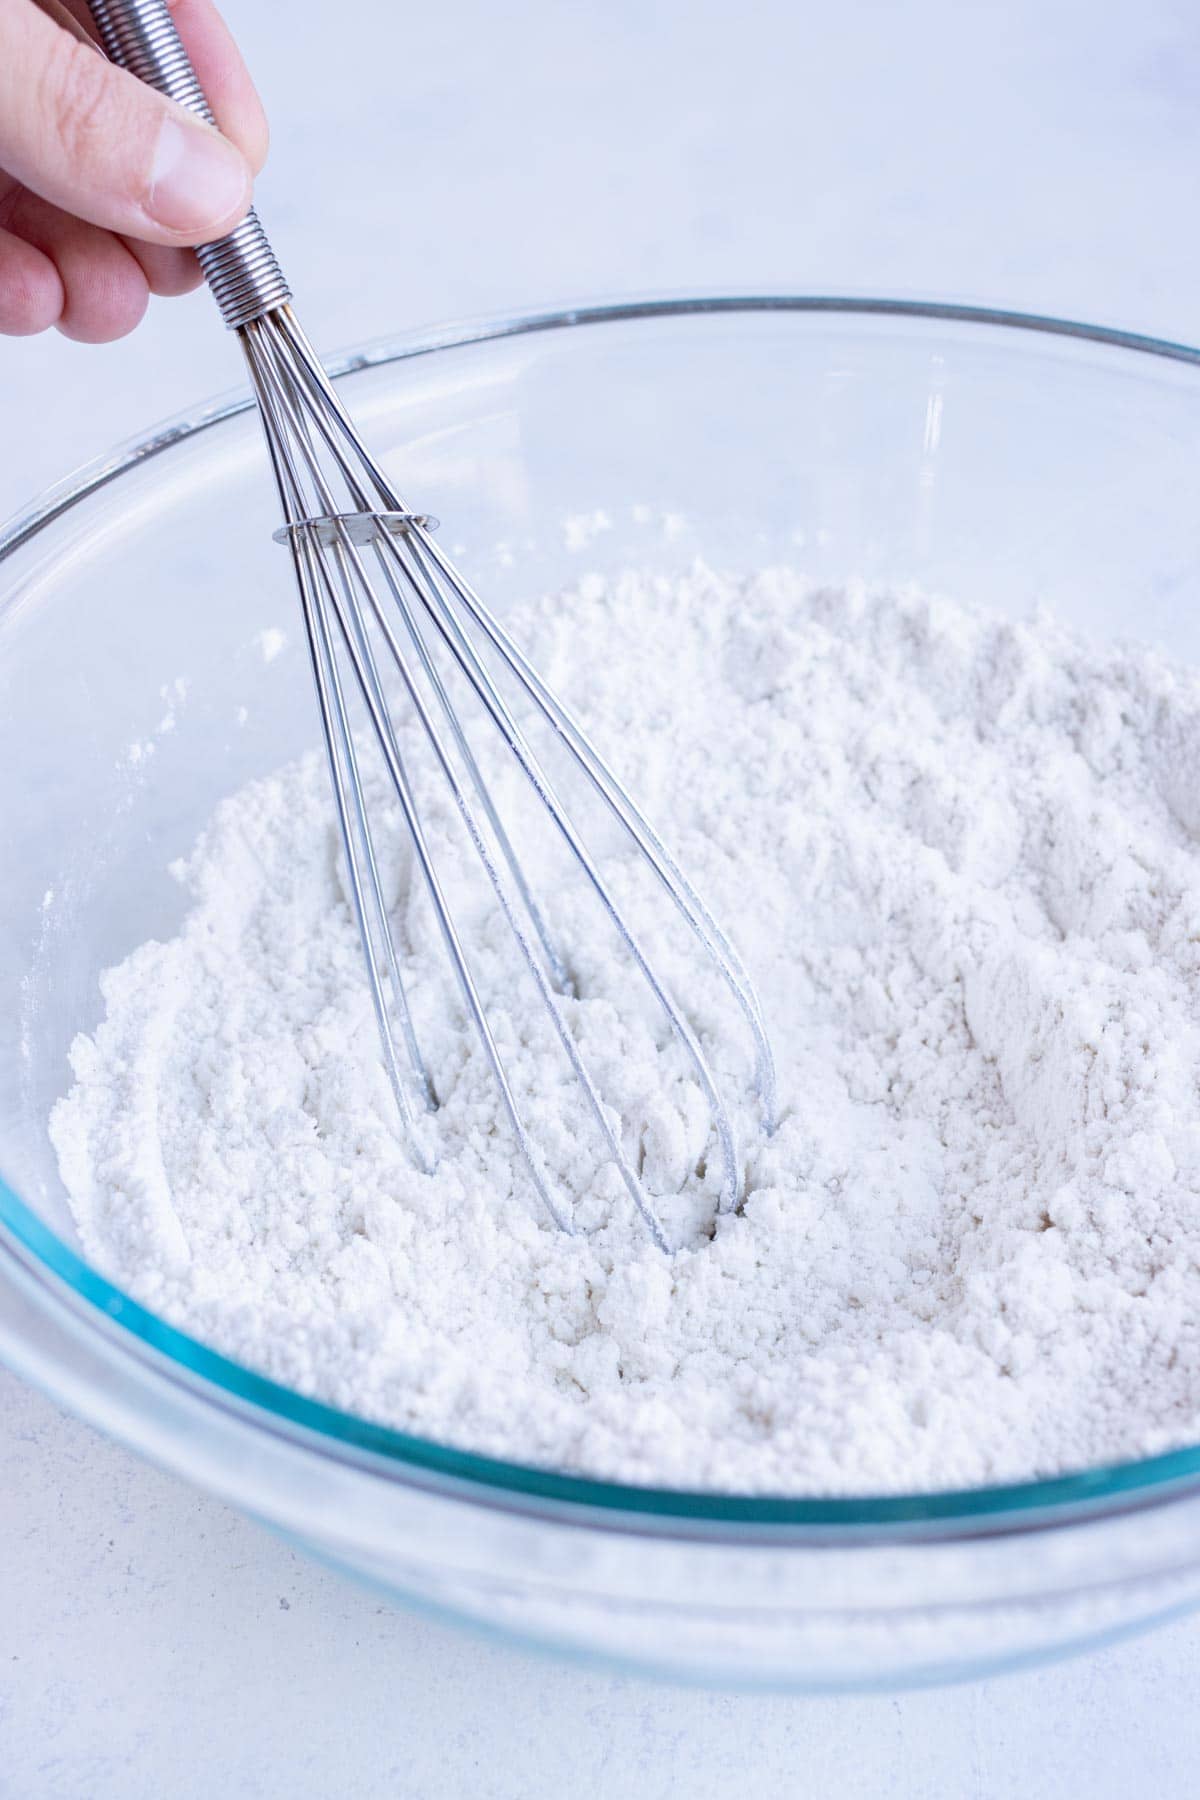 Dry ingredients are combined in a bowl.